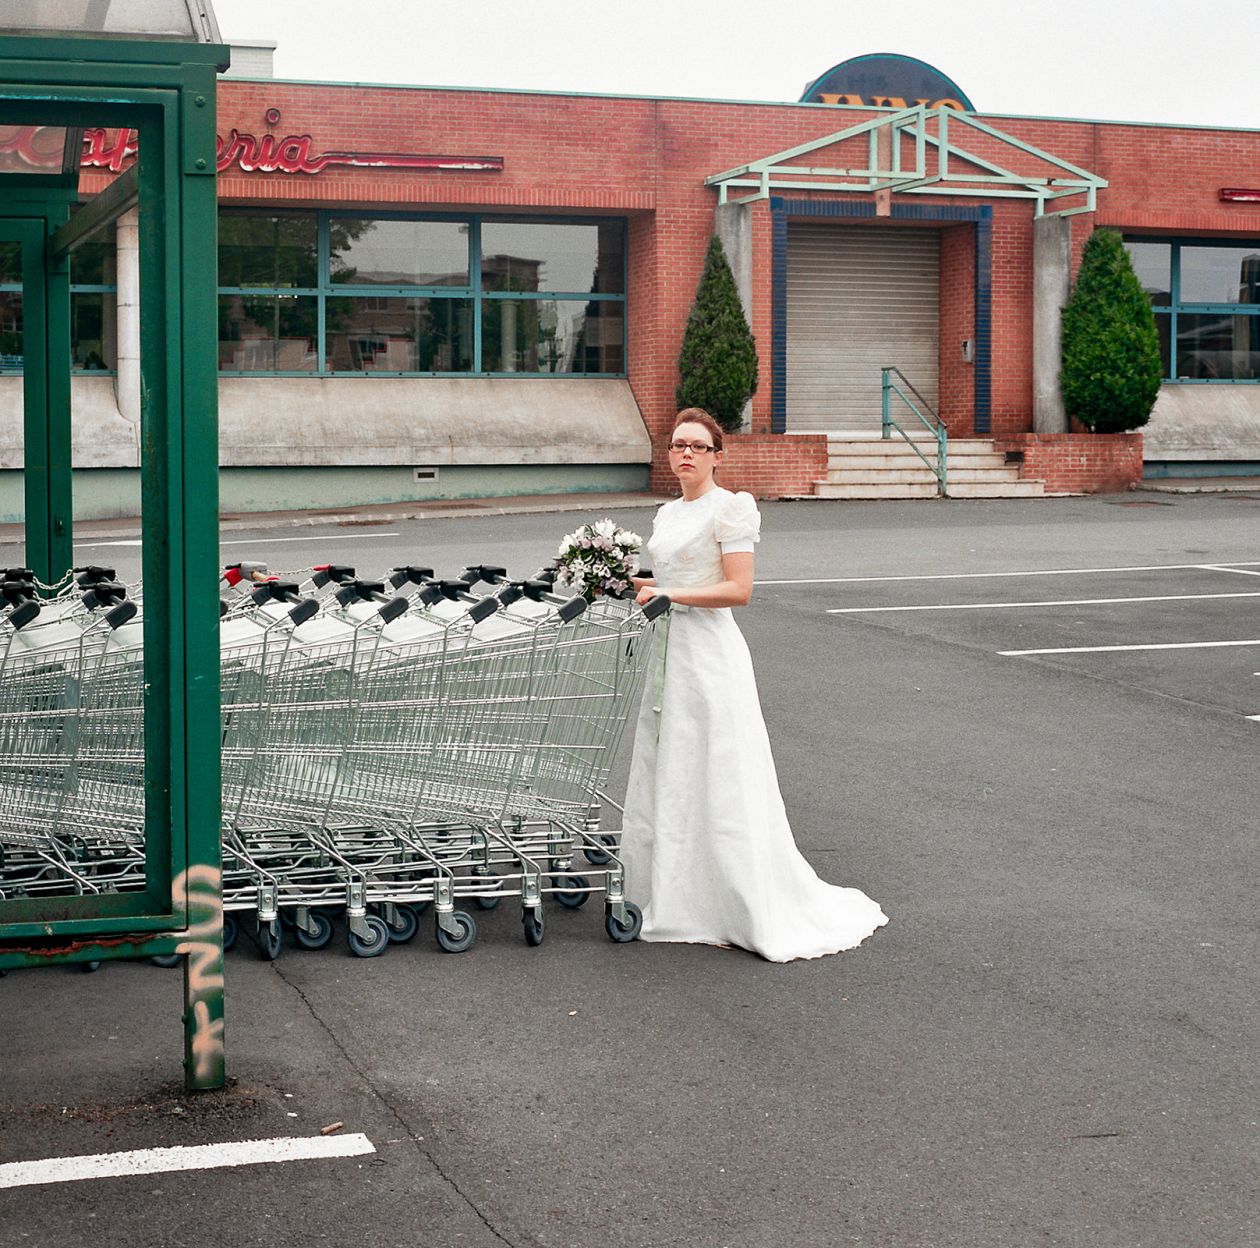 Beautiful bride in a white wedding dress with a bouquet of flowers in a shopping cart